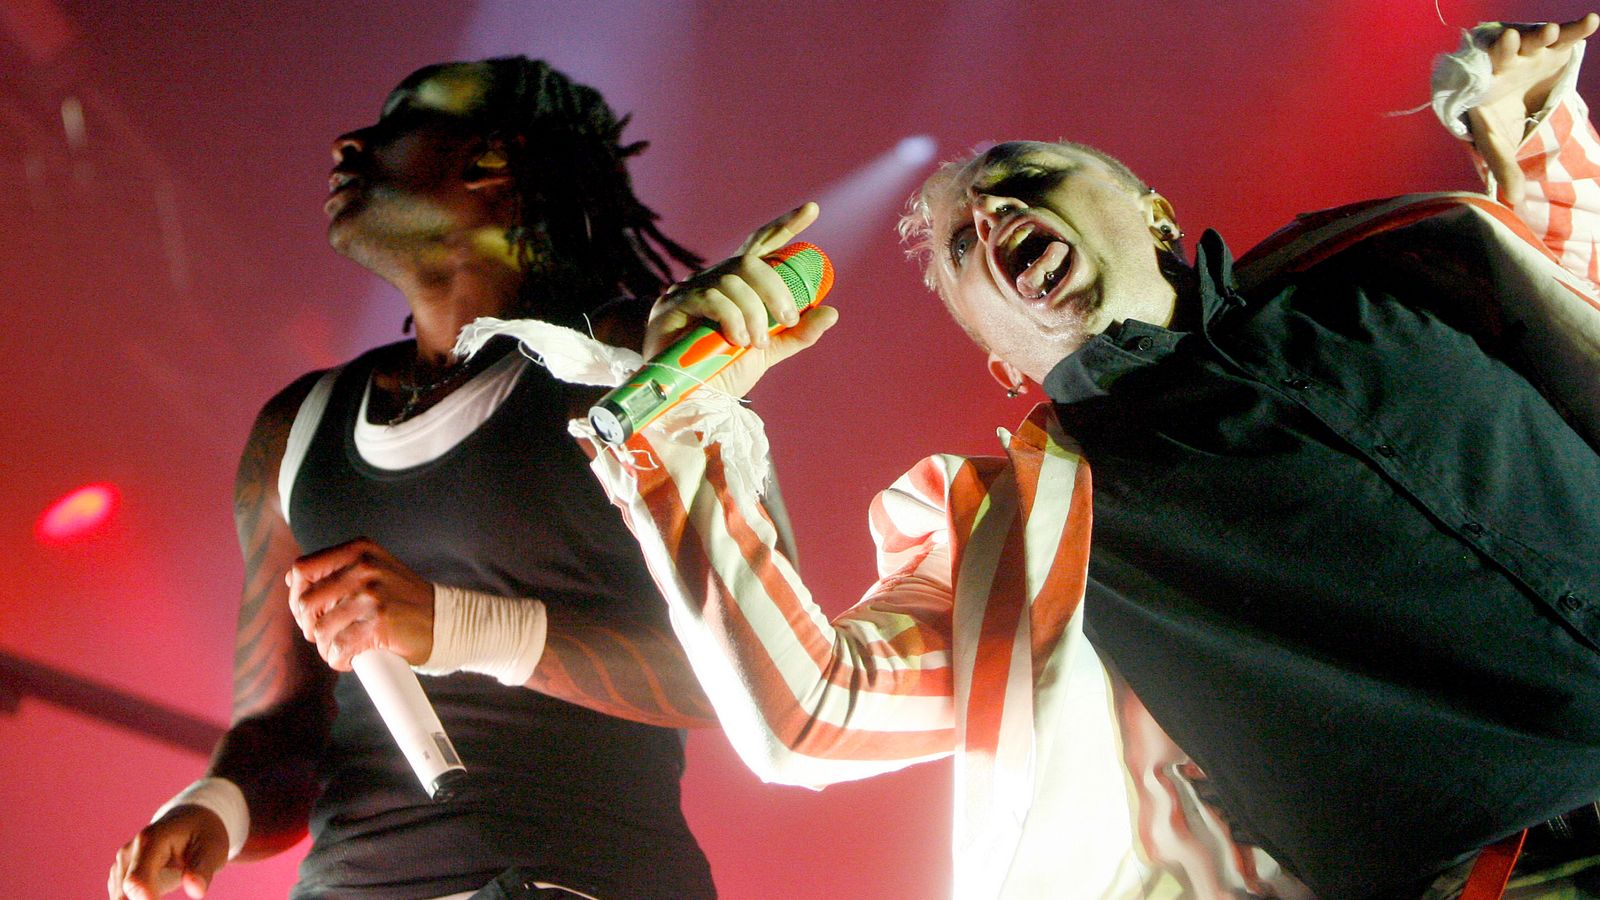 The Prodigy change lyrics to Smack My B***h Up - 26 years after track was released